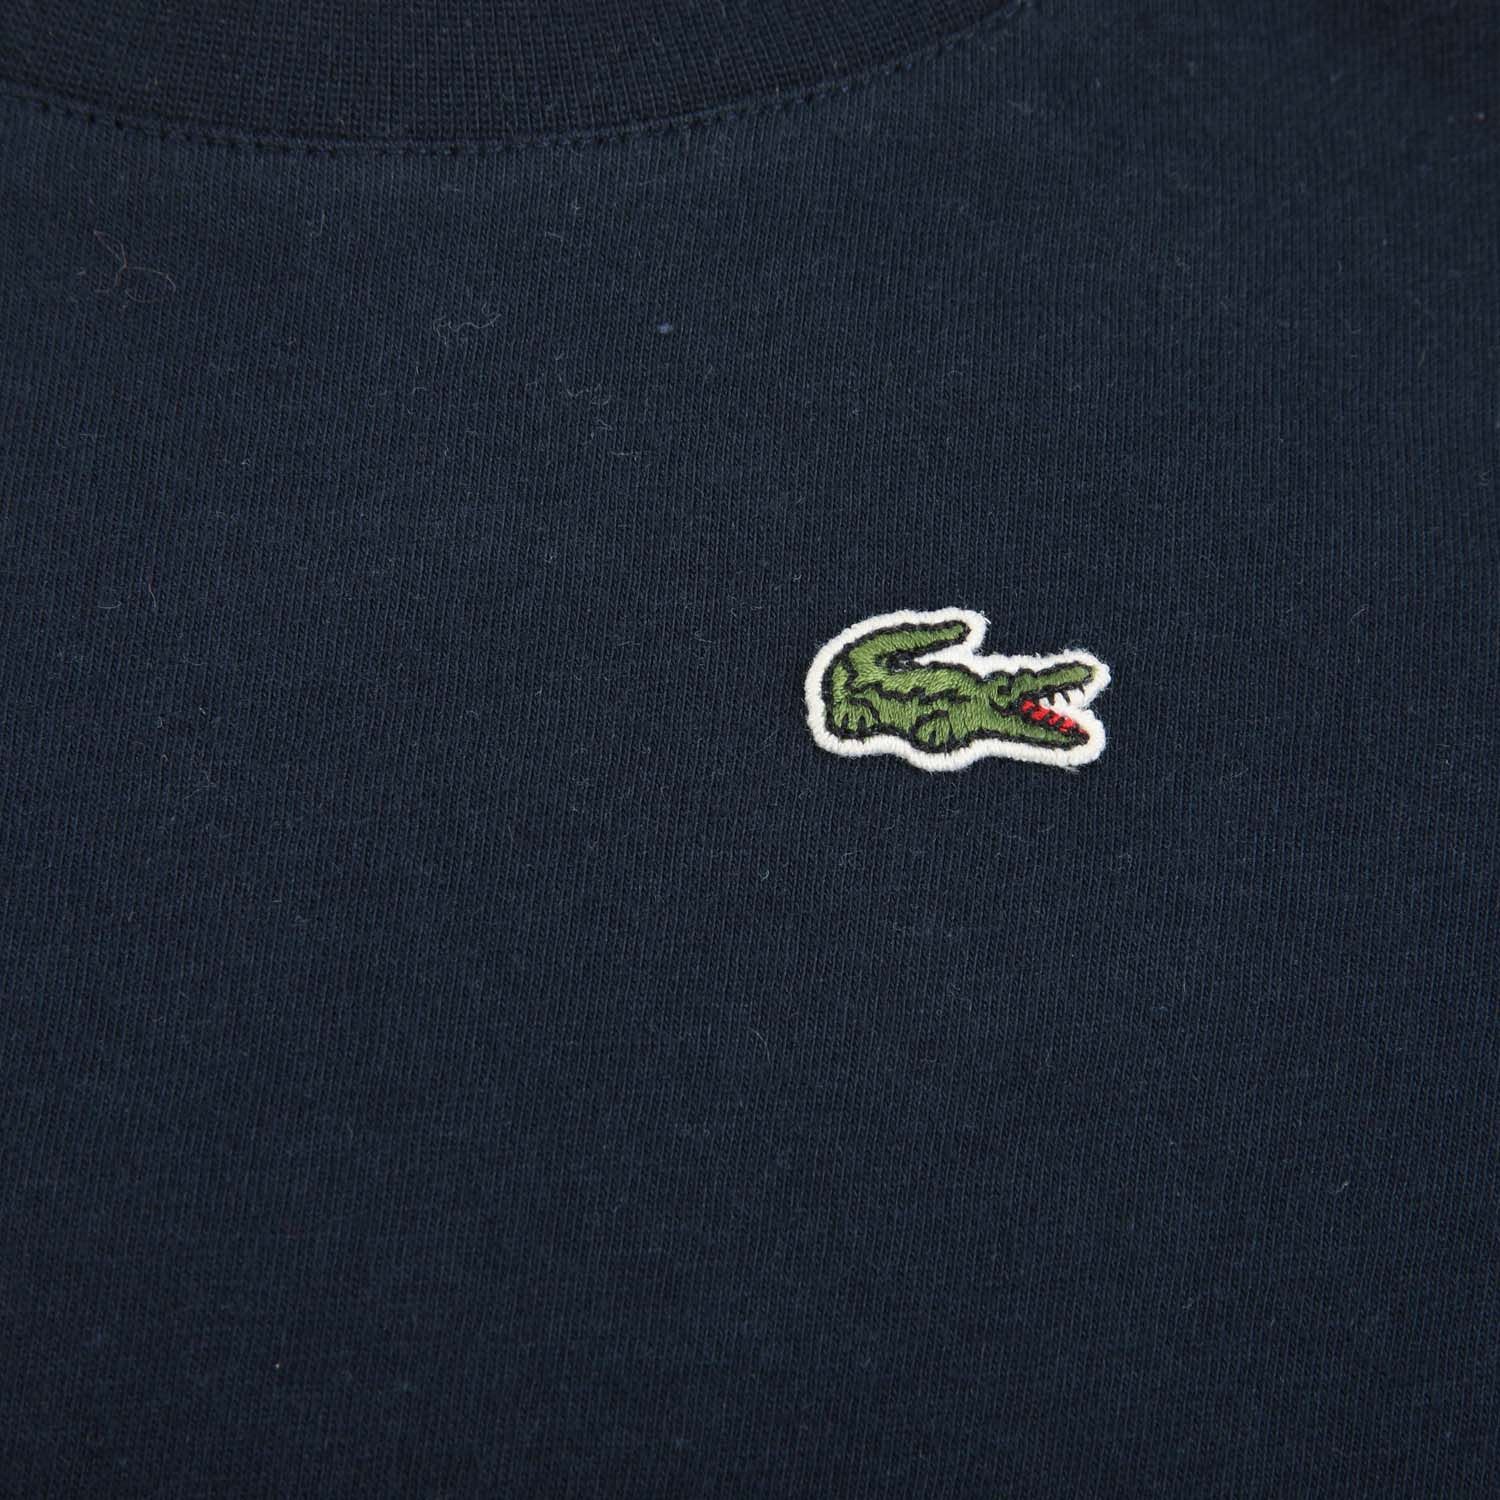 Navy Lacoste Boys Crew Neck Cotton Jersey T-Shirt - Get The Label